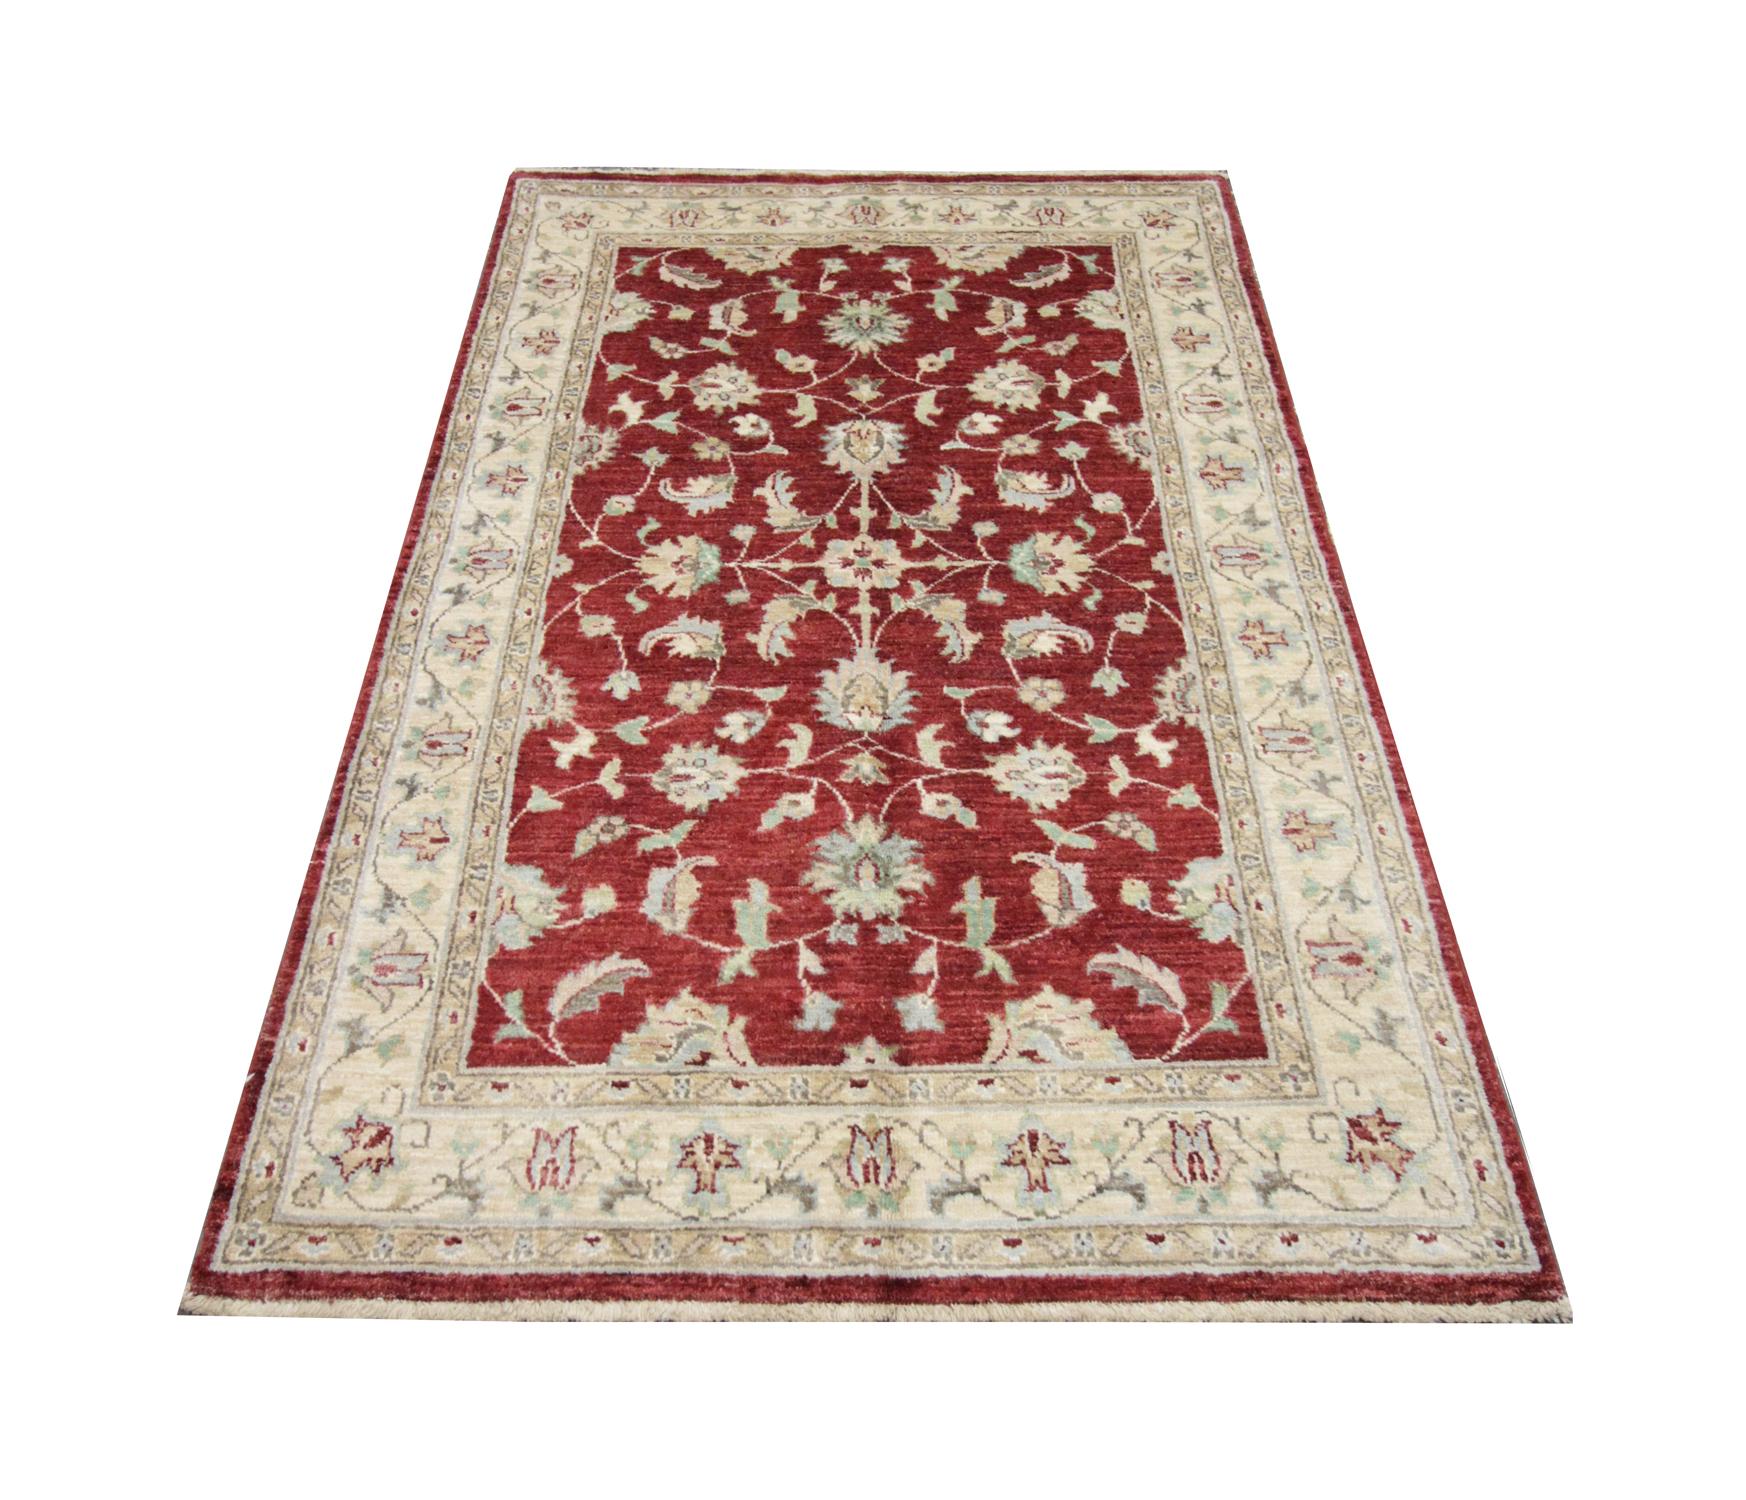 Tribal Traditional Ziegler Carpet Rug Handwoven Floral Wool Red Area Rug For Sale